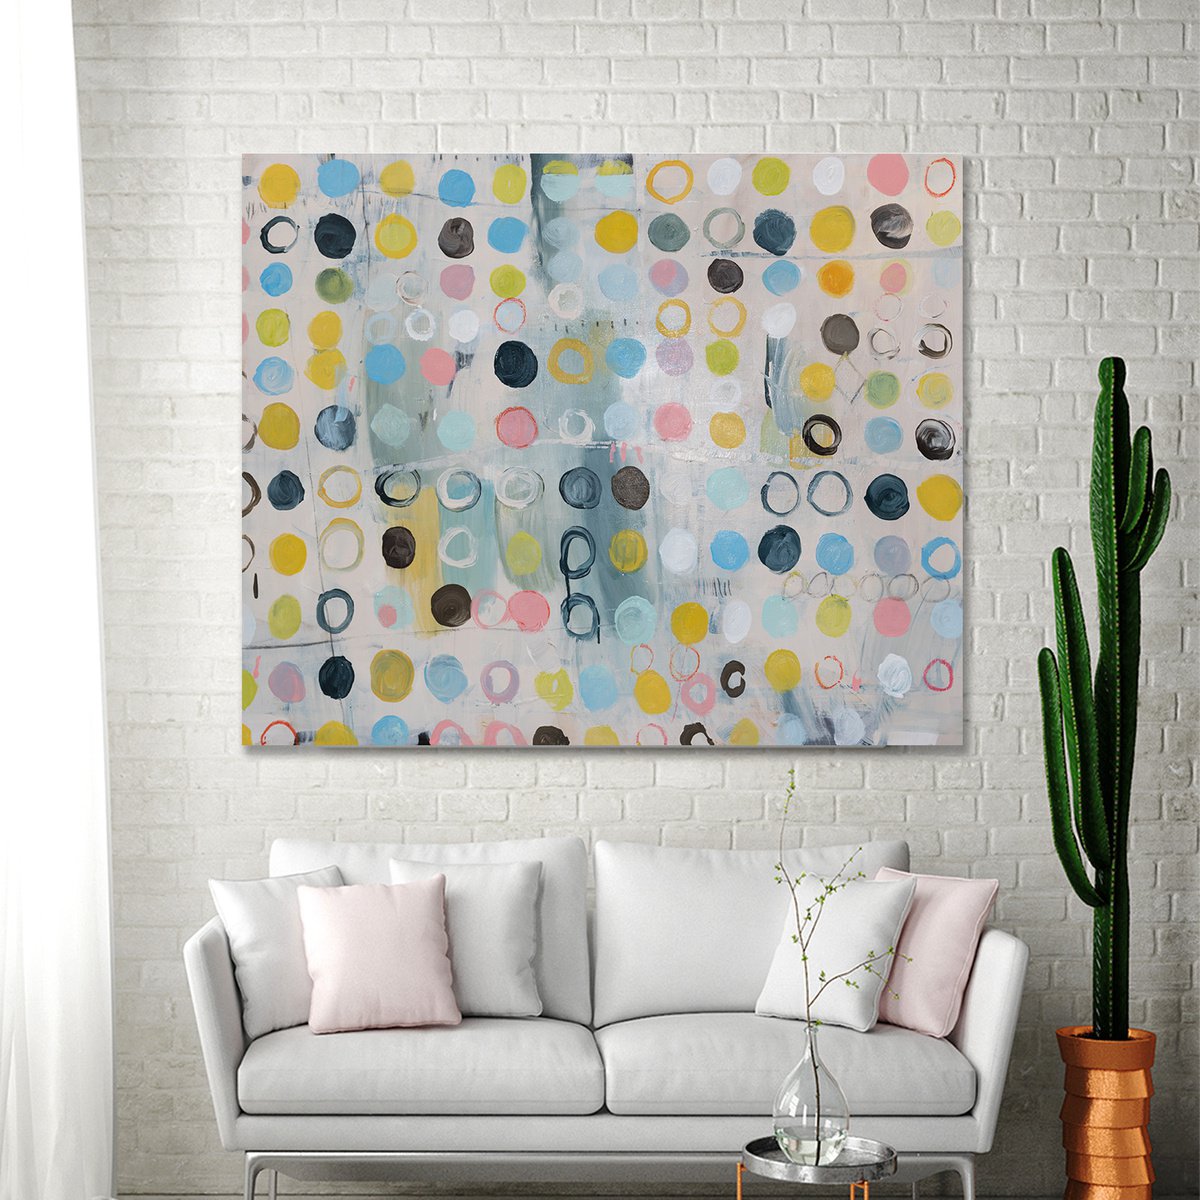 Dots 09 (100x80 cm) by DUEALBERI